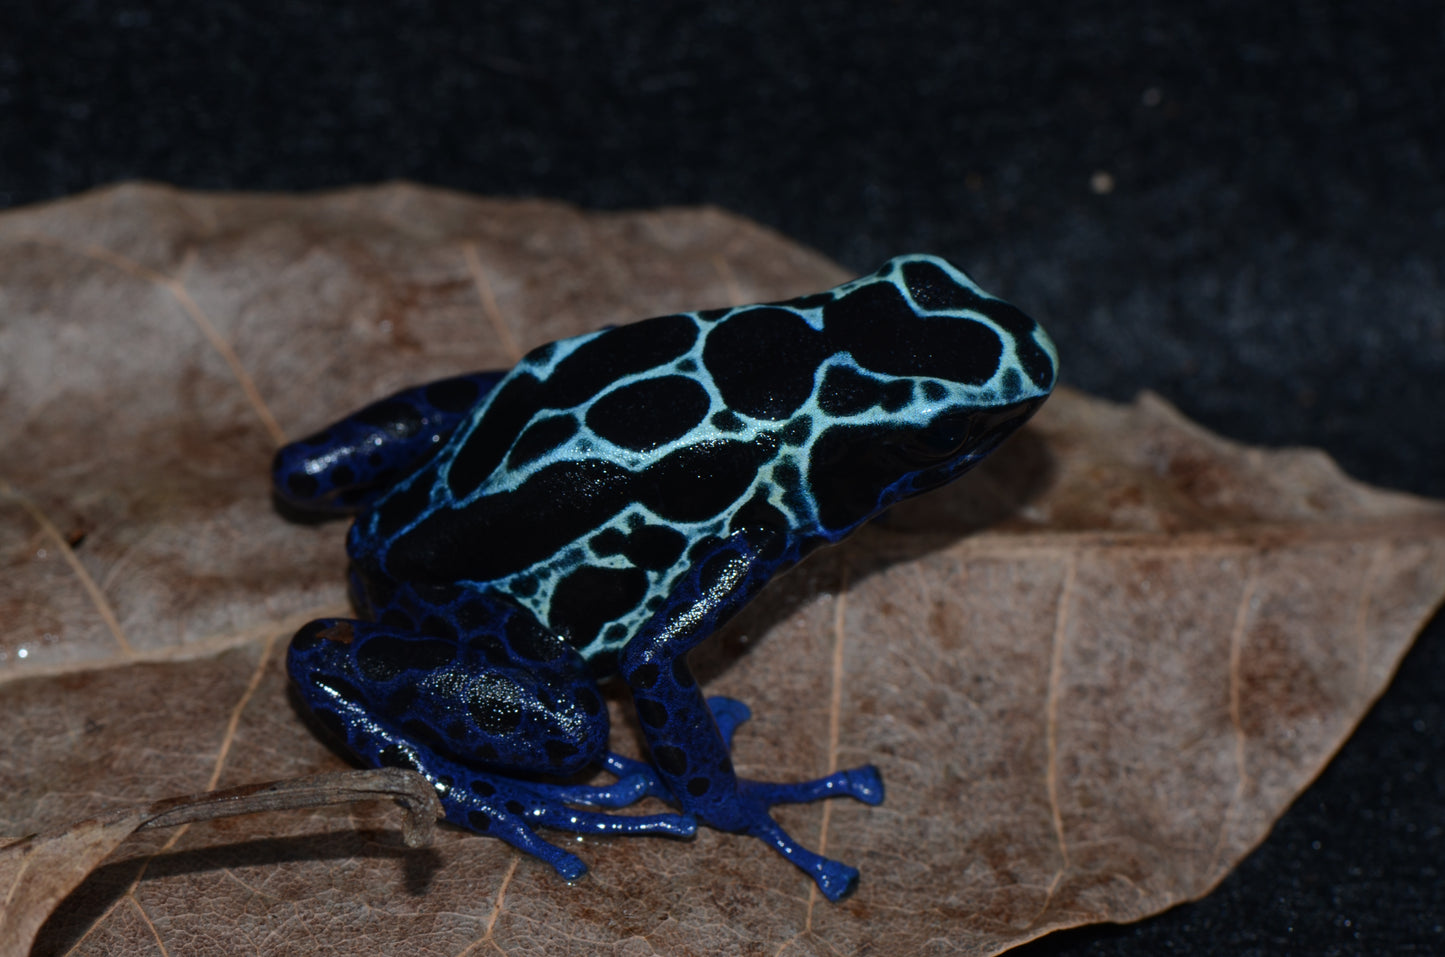 Dendrobates tinctorius - New River - This is a large form from Surinam.